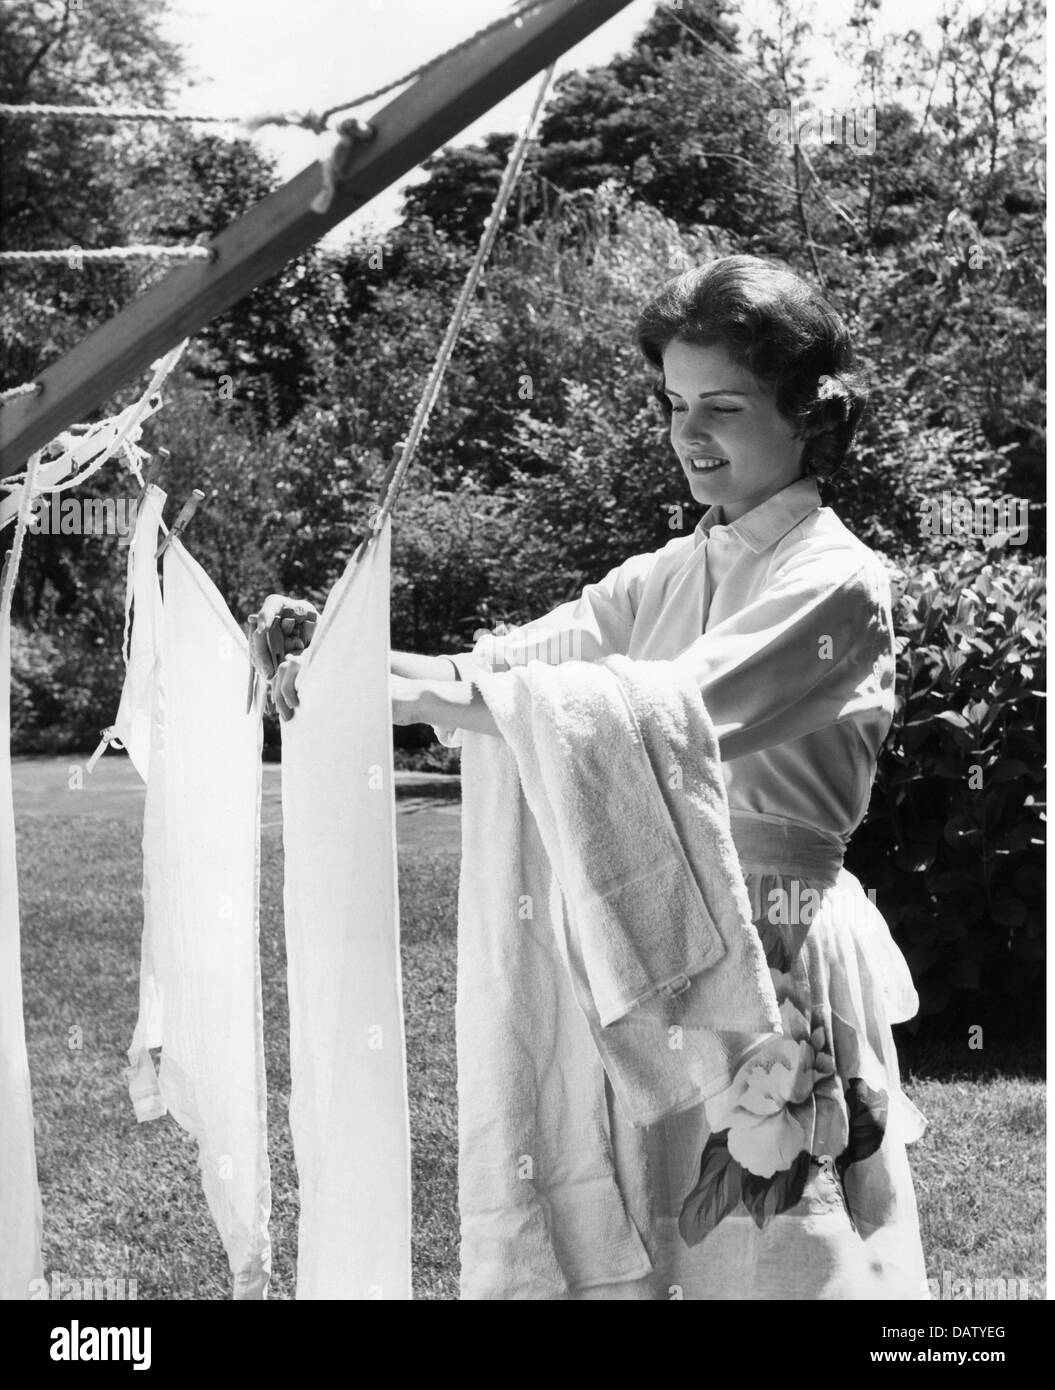 household, washing, woman outdoors hanging her laundry on the clothesline, 1950s, Additional-Rights-Clearences-Not Available Stock Photo